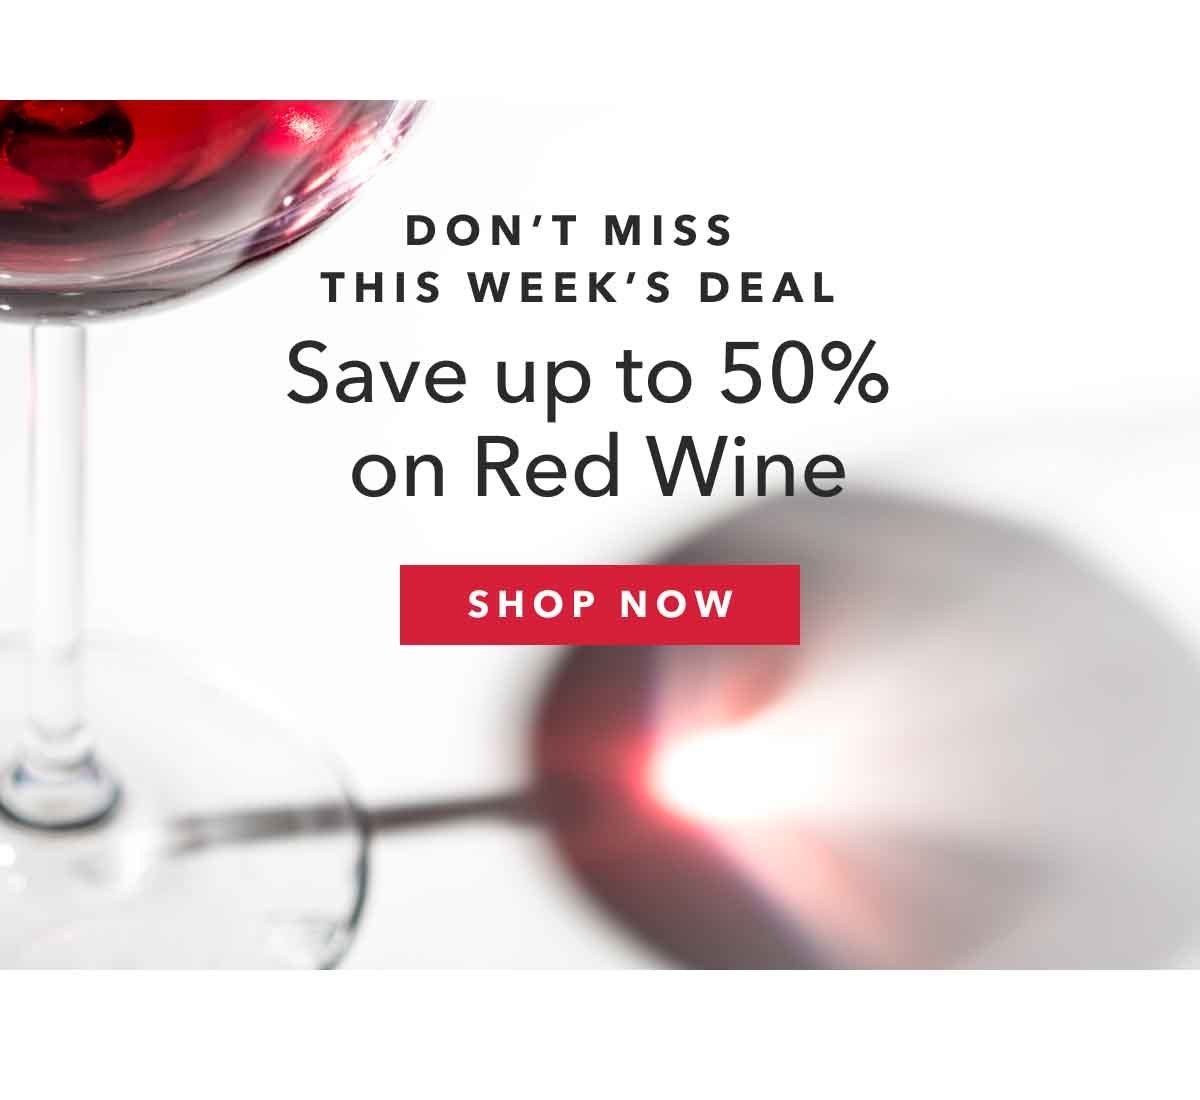 Save up to 50% on red wine